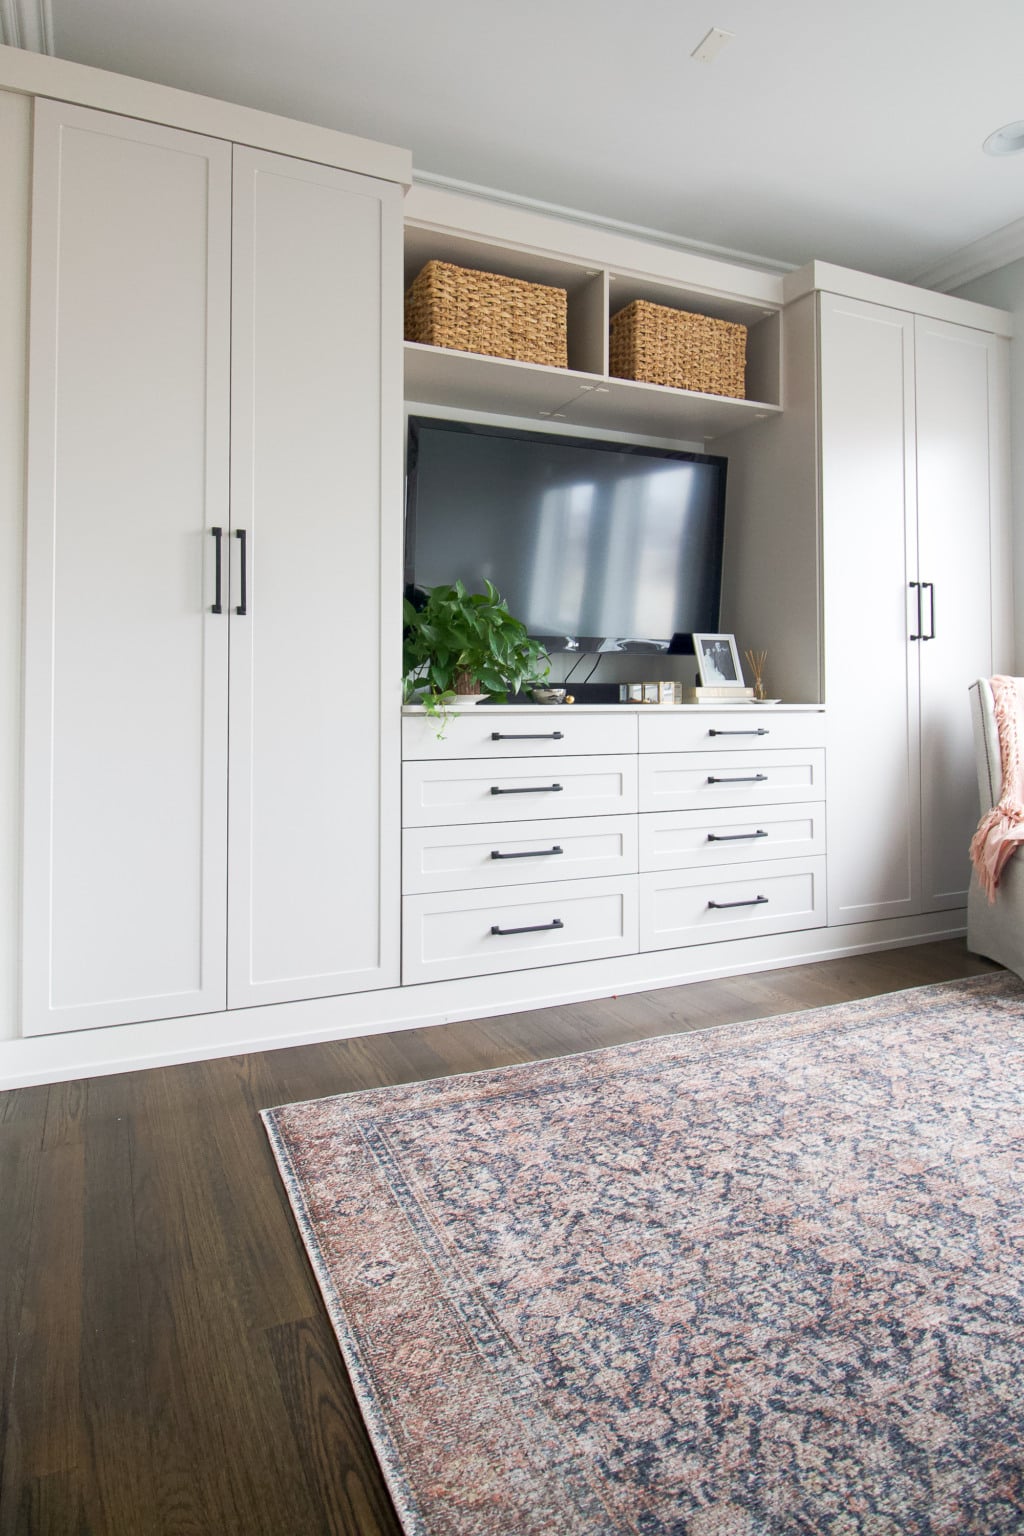 My best tips to organize built-ins